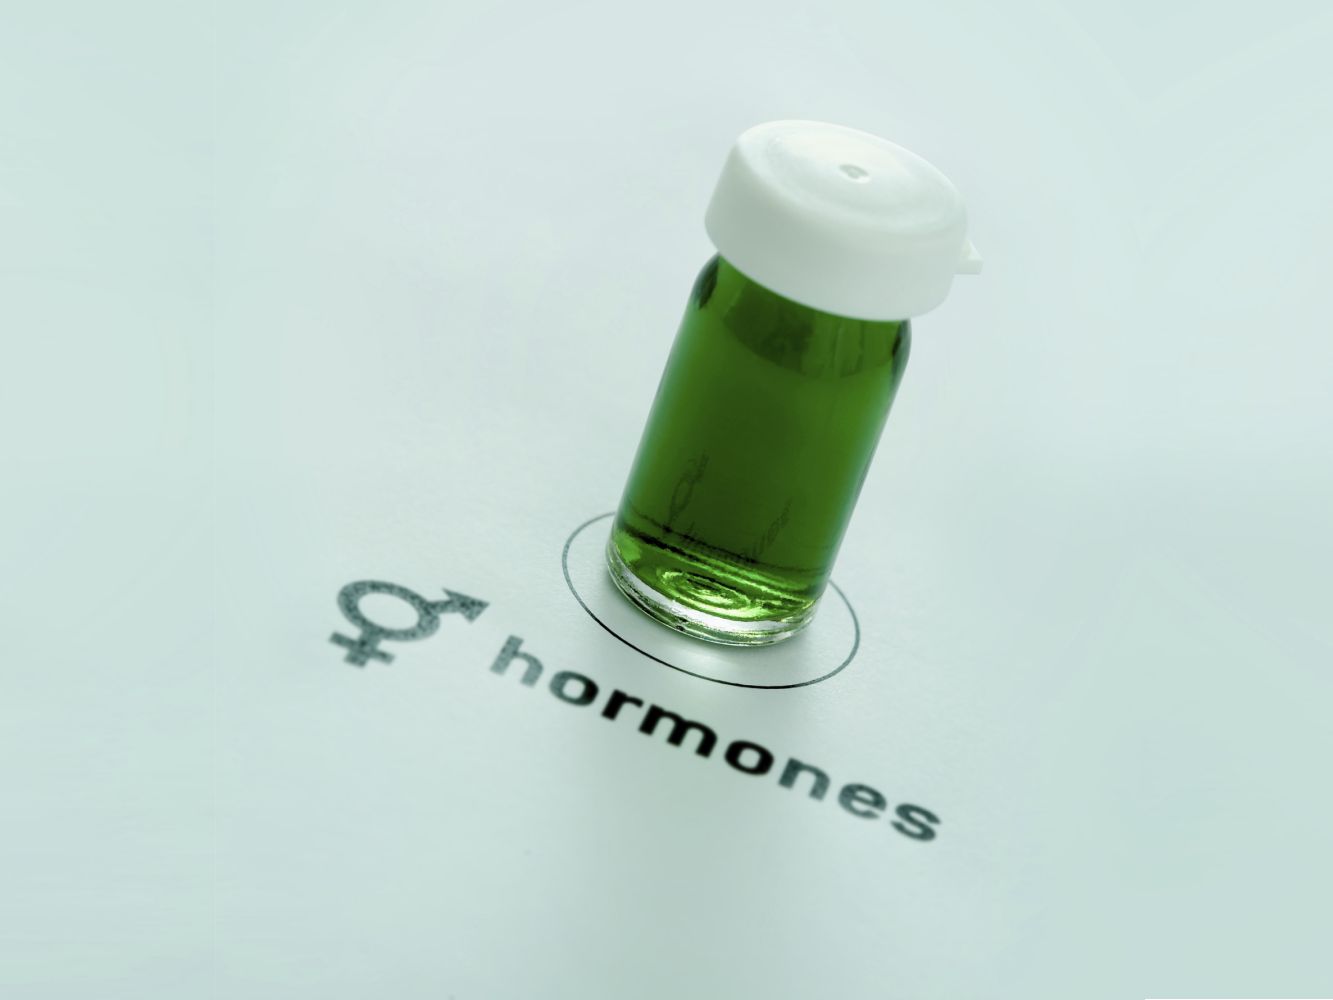 What Is The Overall Purpose Of Consuming Steroid Hormones For The First Time?